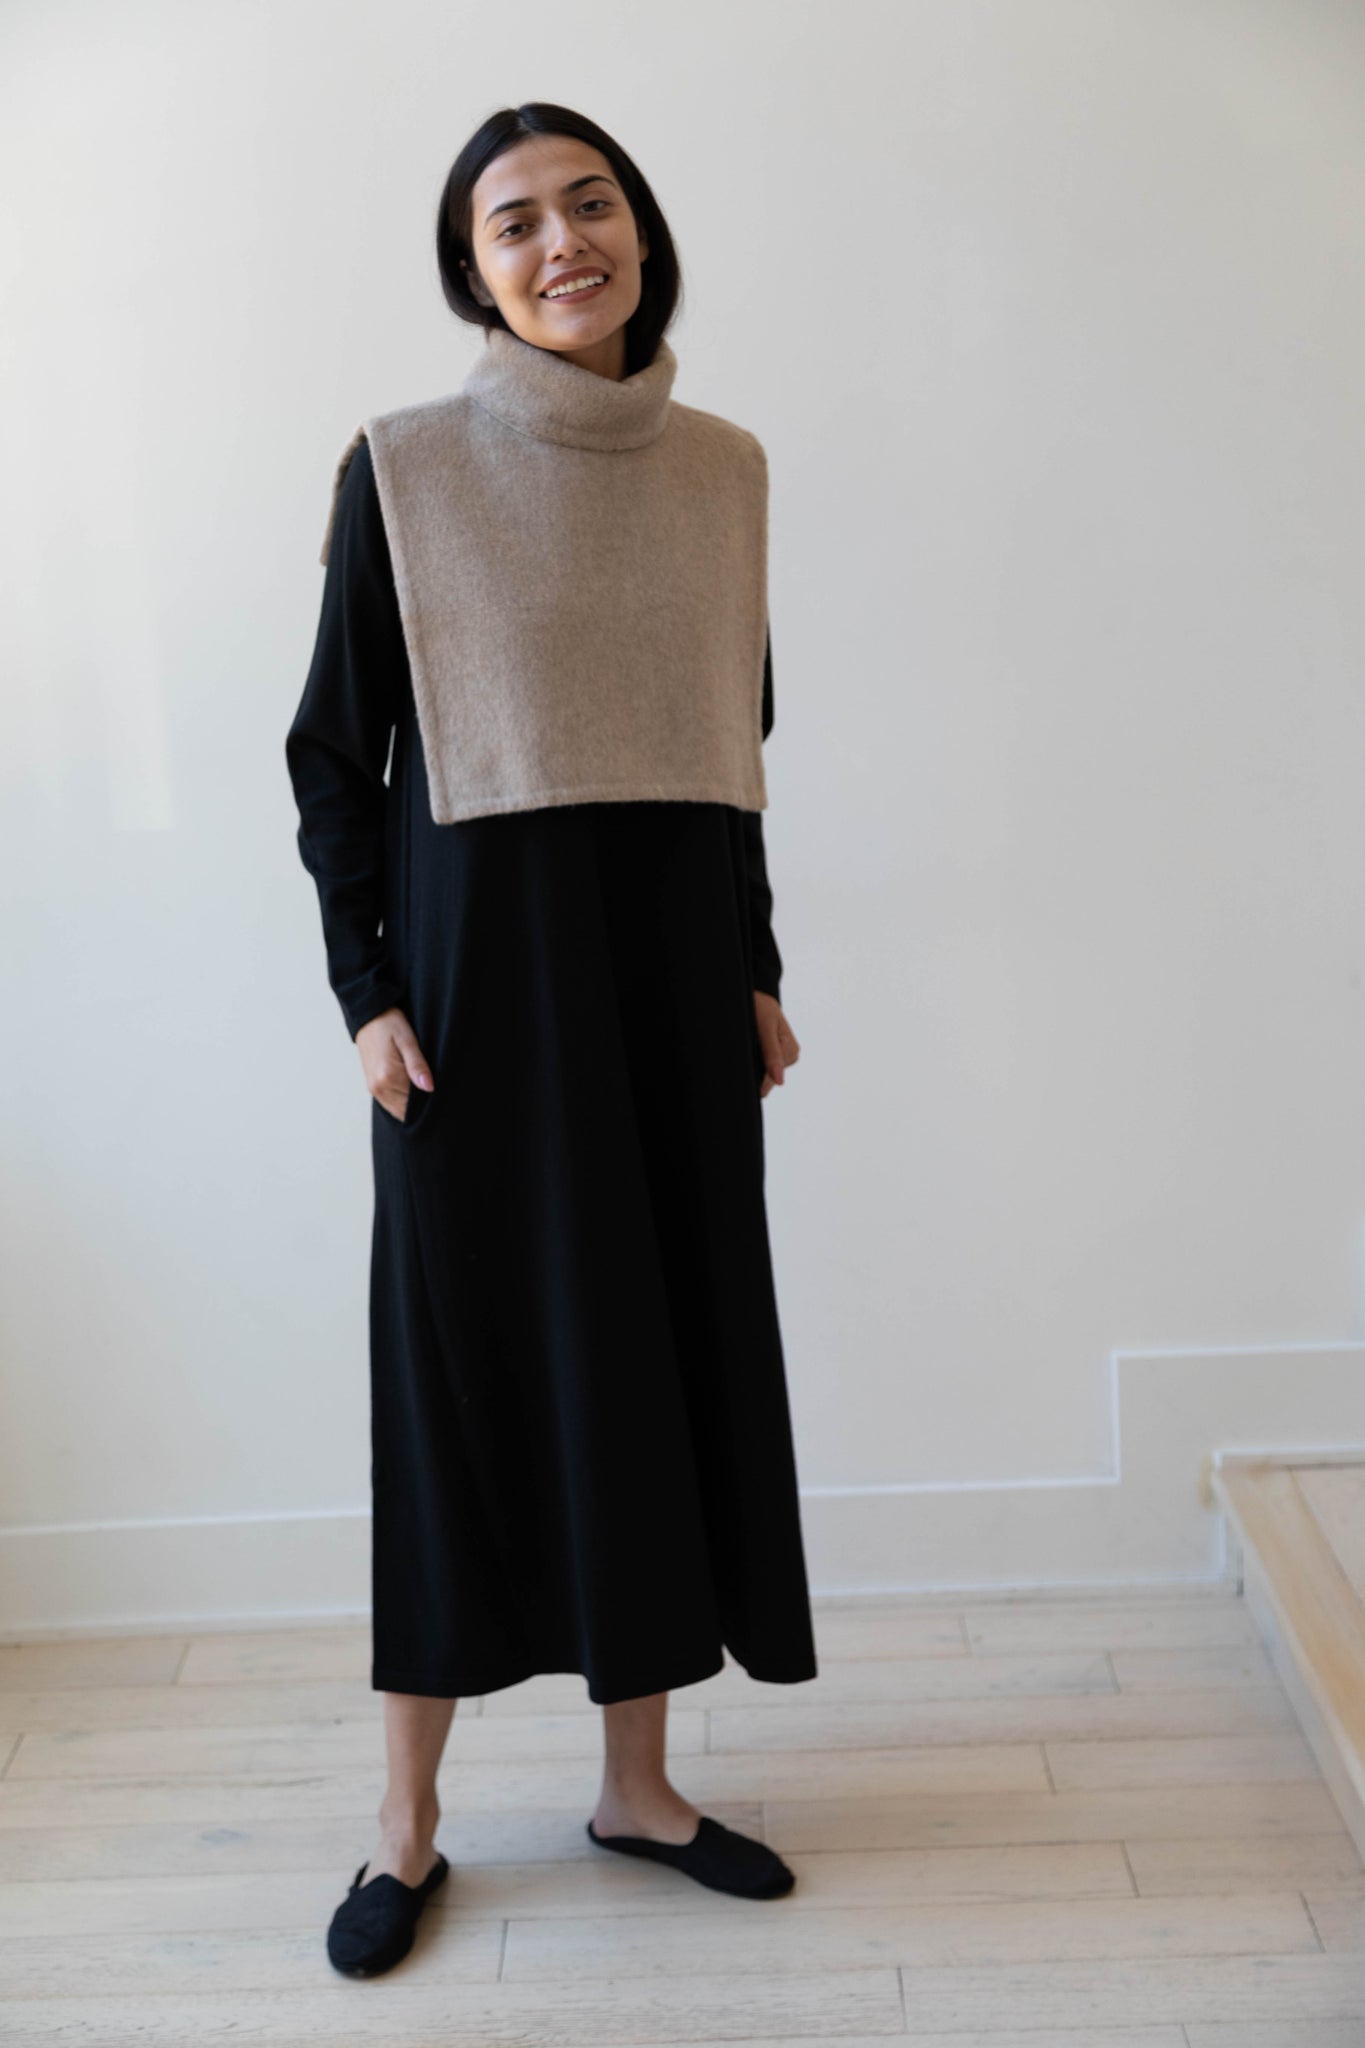 EASTBYEASTWEST Hearn Cape in Oyster